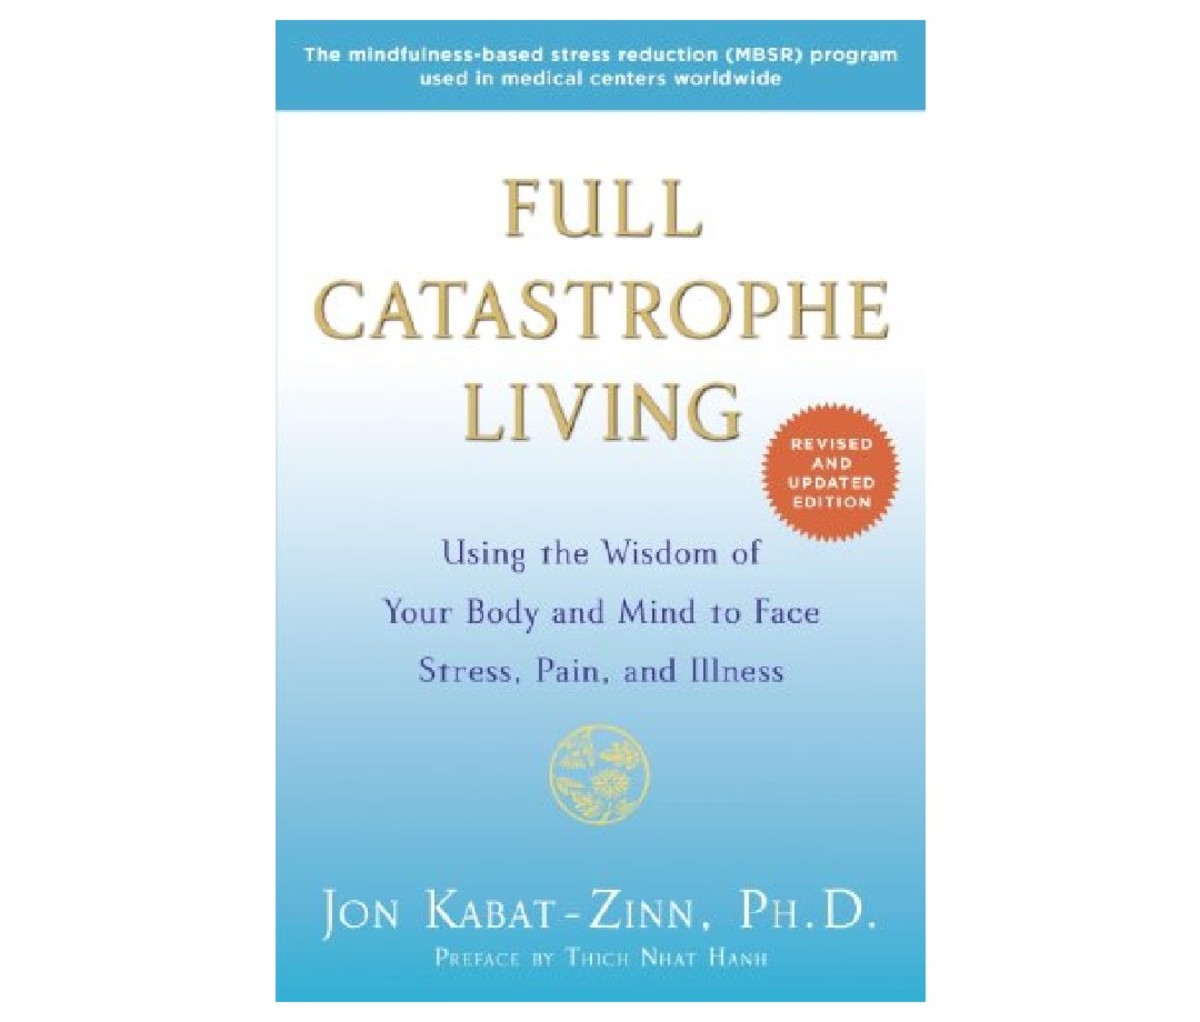 Full Catastrophe Living: Using the Wisdom of Your Body and Mind to Face Stress, Pain, and Illness by Jon Kabat-Zinn, PhD